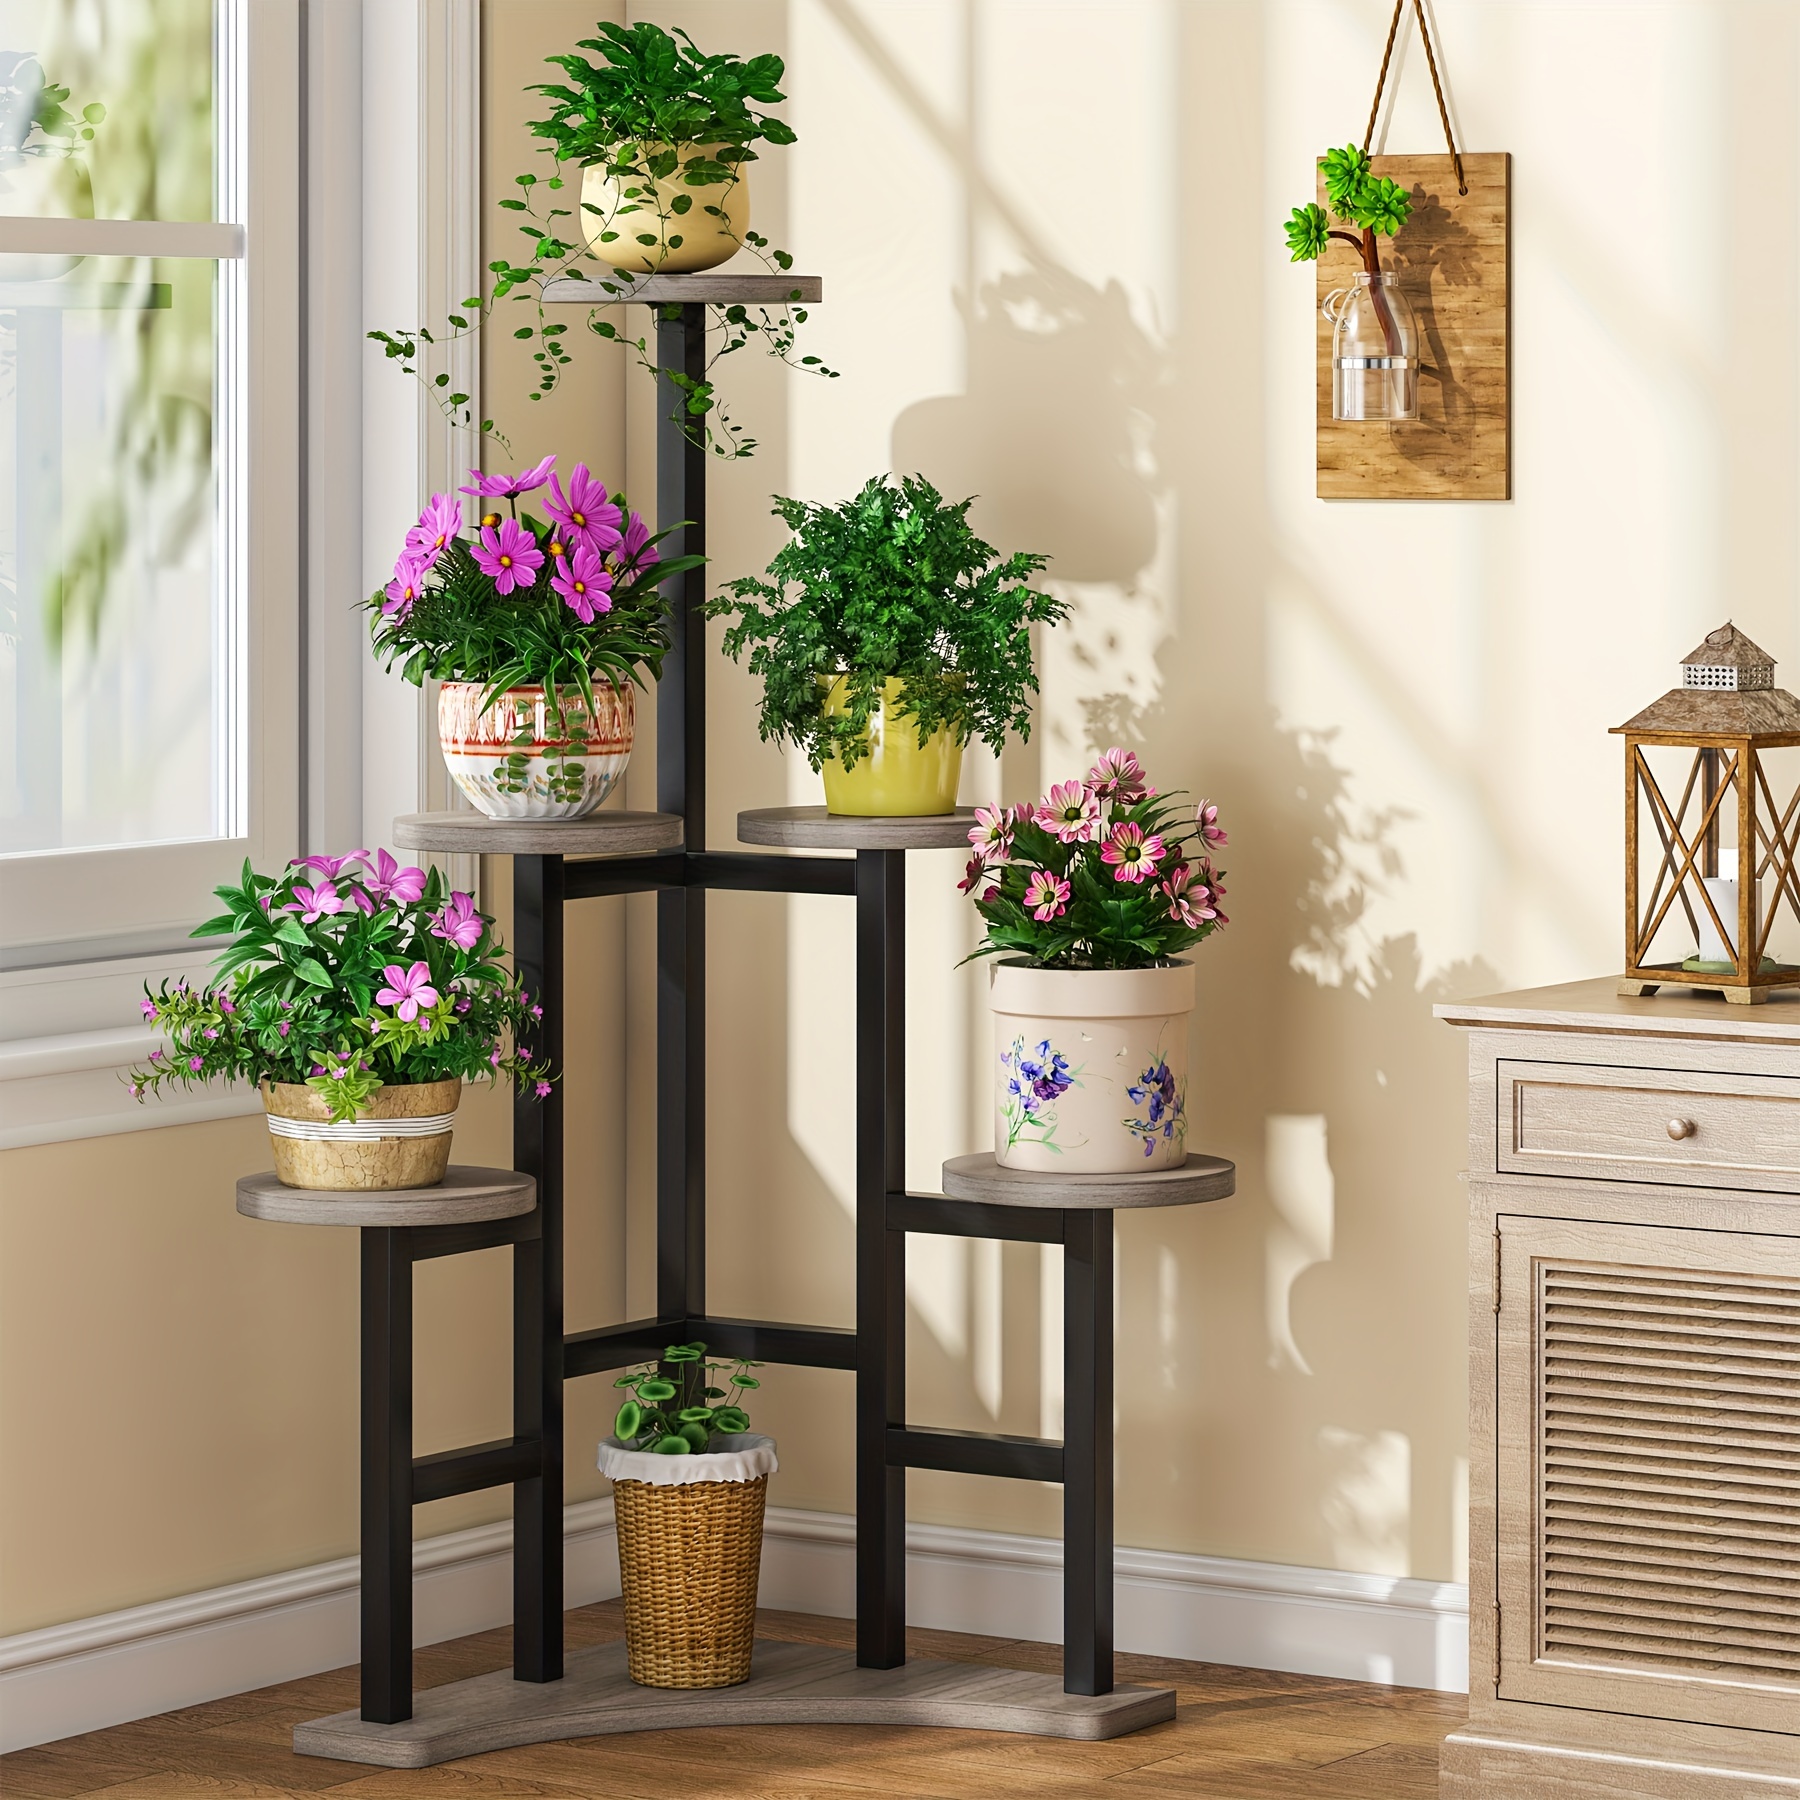 

Little Tree Corner Plant Stand Indoor, 6 Tiered Plant Shelf Flower Stand, Tall Multiple Potted Plant Holder Rack Planter Organizer For Living Room Balcony Garden